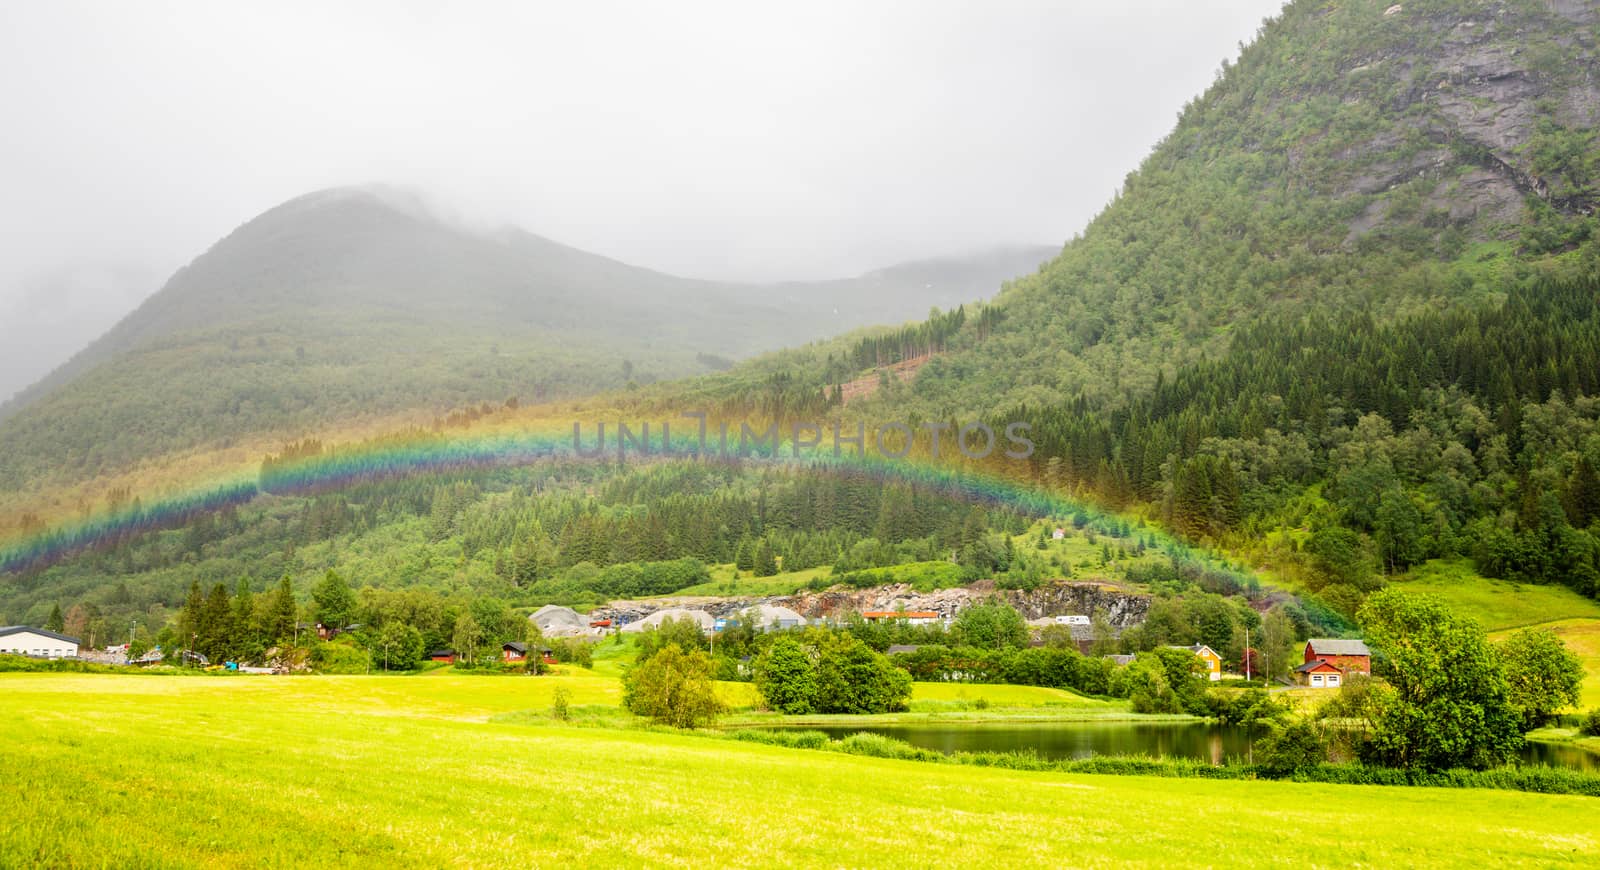 Colorful rainbow over the fields, lake and houses of Skei village, Jølster in Sogn og Fjordane county, Norway.